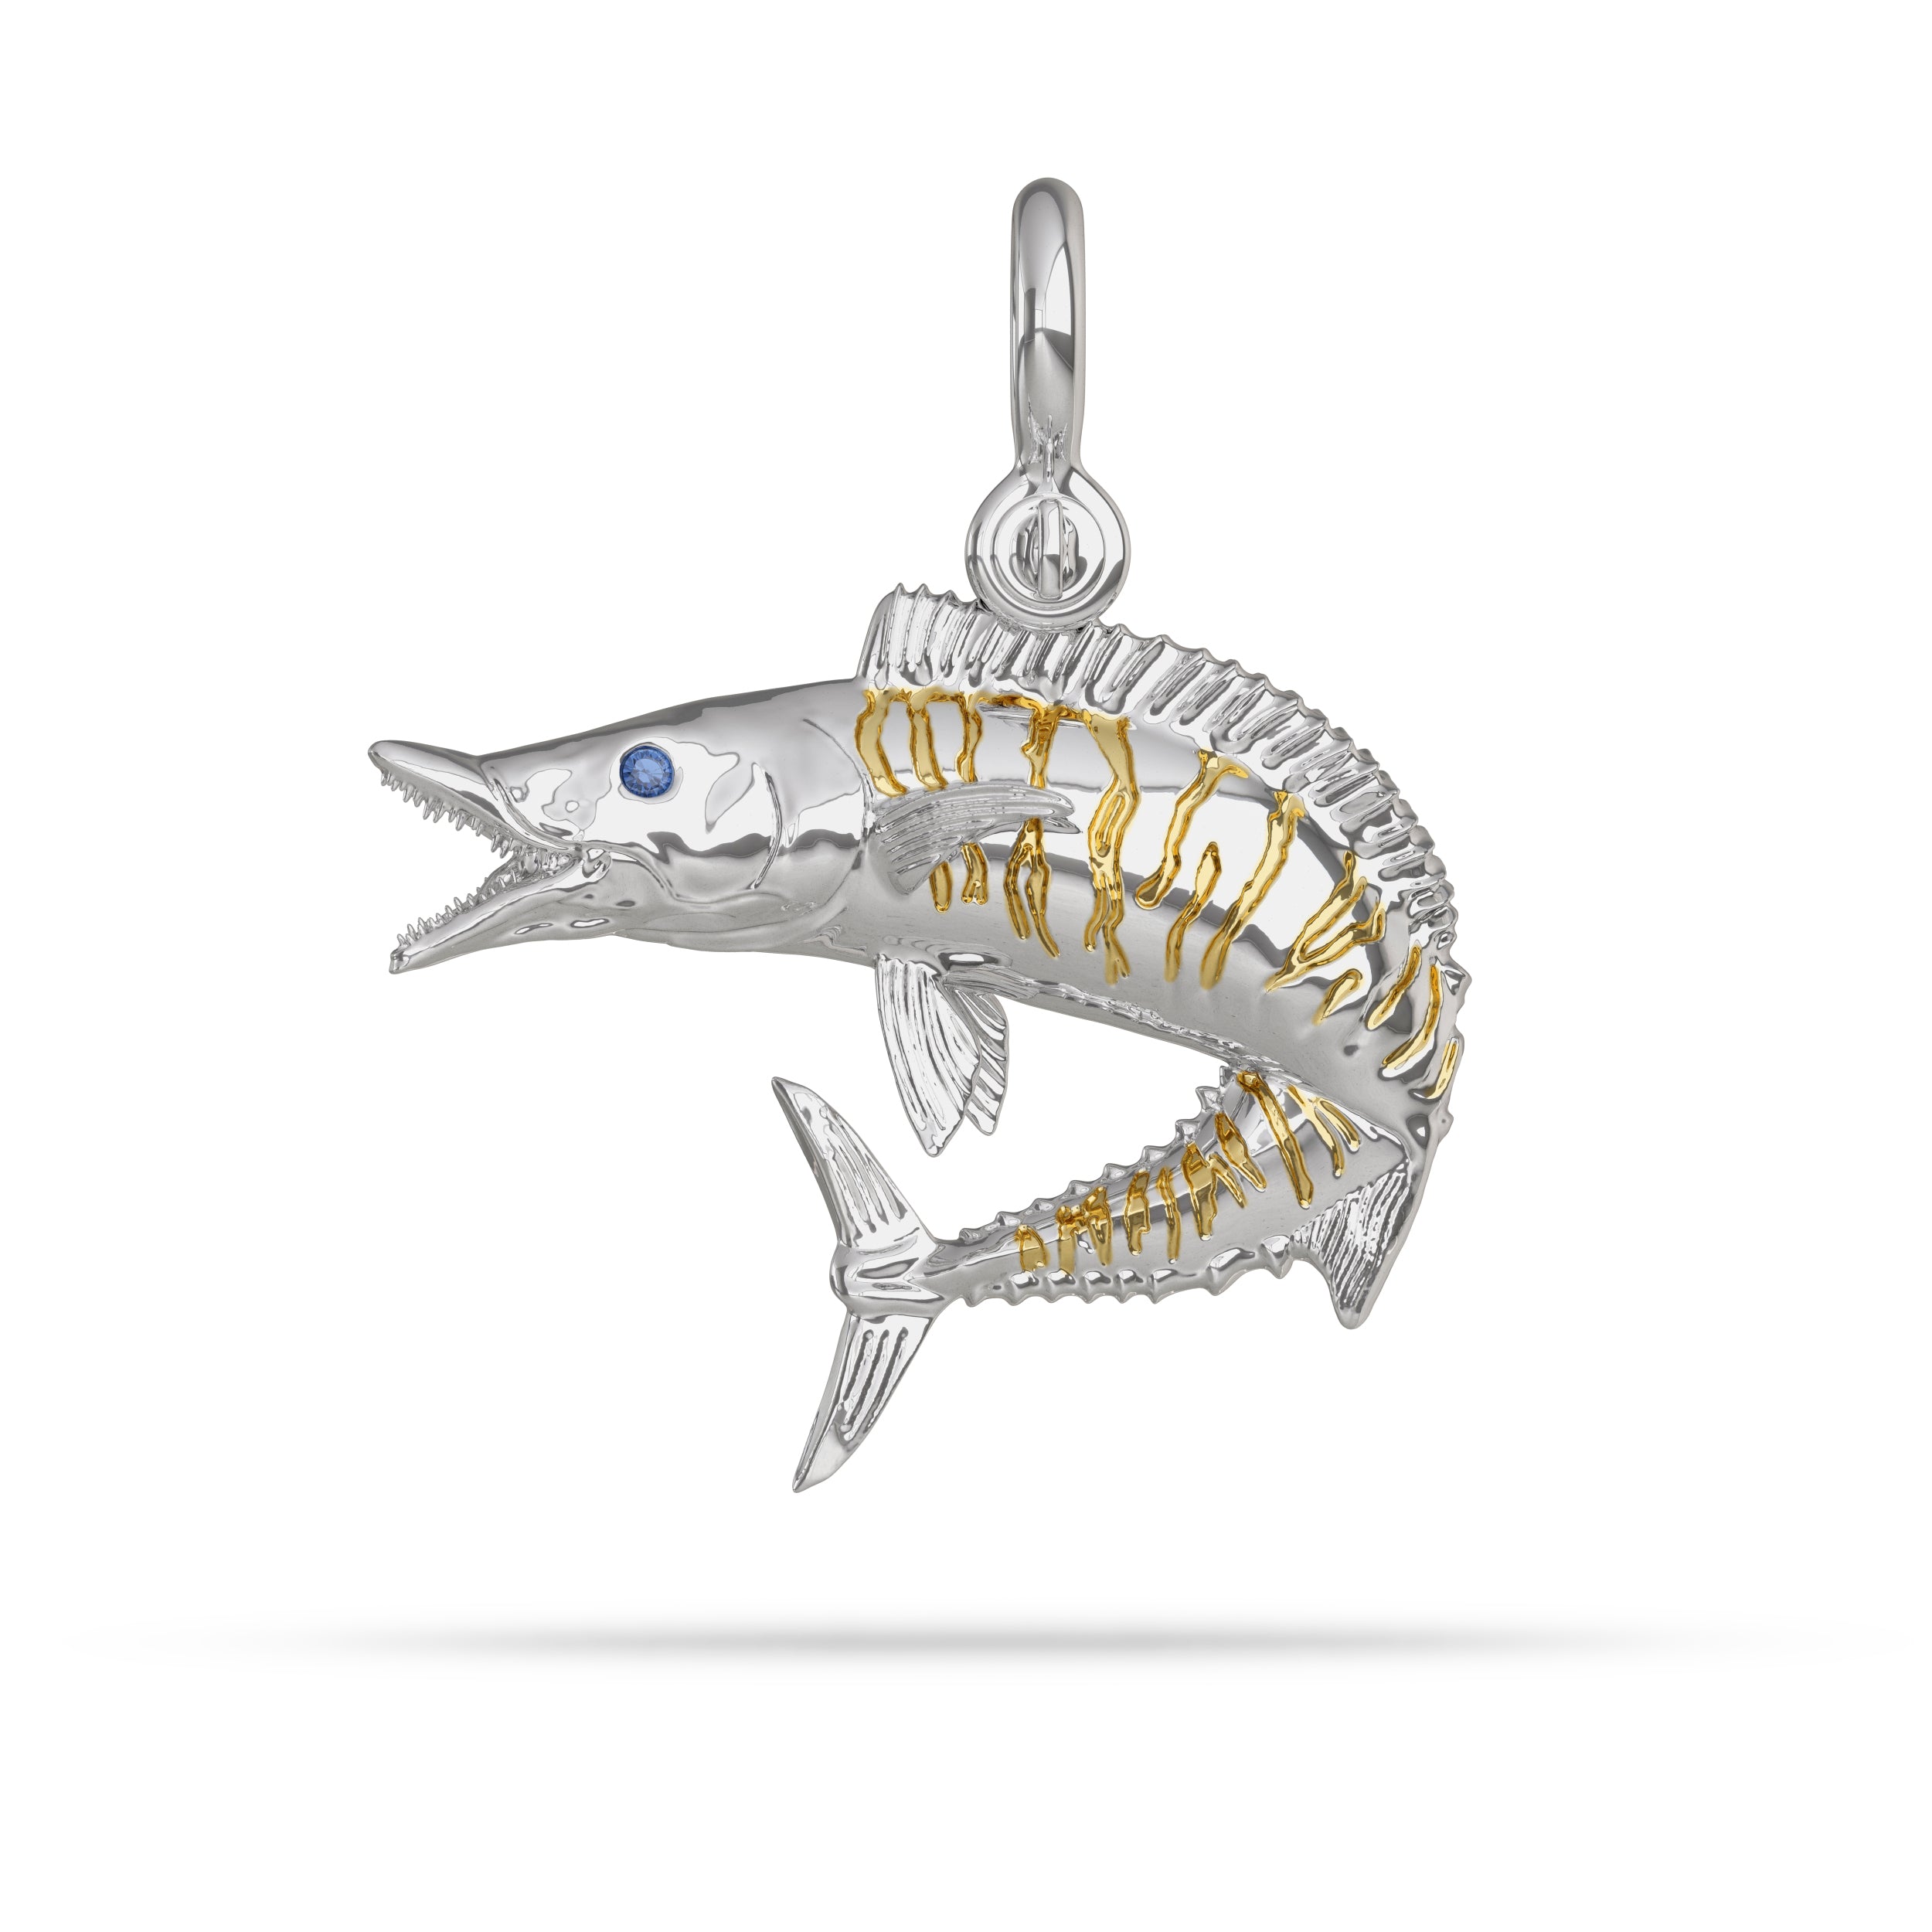 Silver Wahoo Necklace Pendant in Action